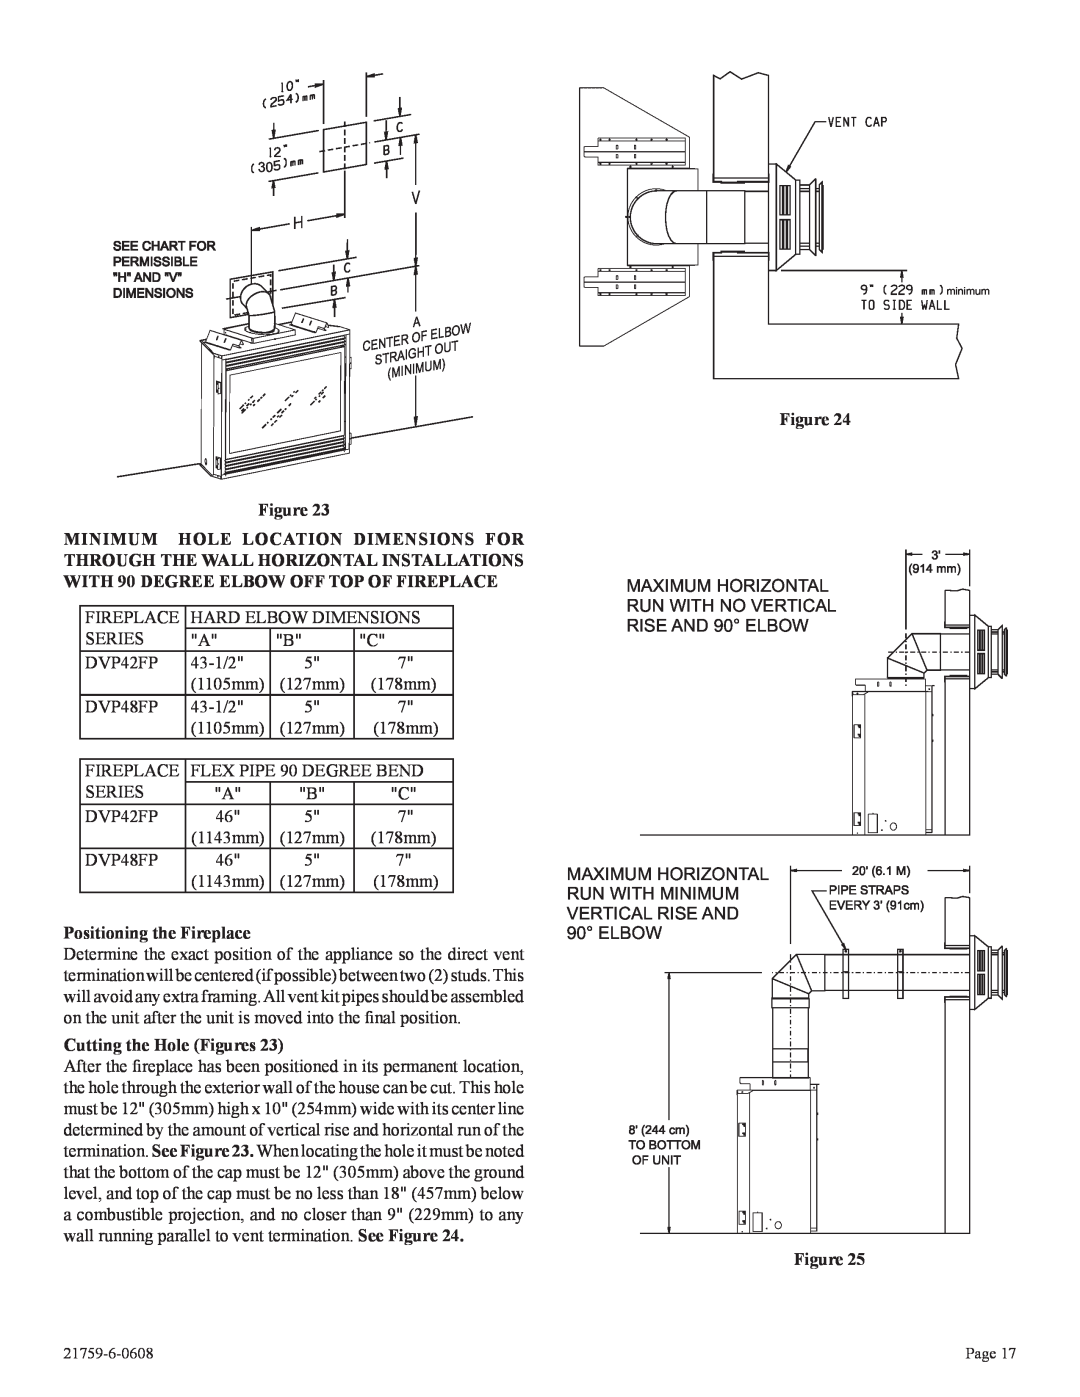 Empire Comfort Systems DVP42FP, P)-2 installation instructions Positioning the Fireplace, Cutting the Hole Figures 